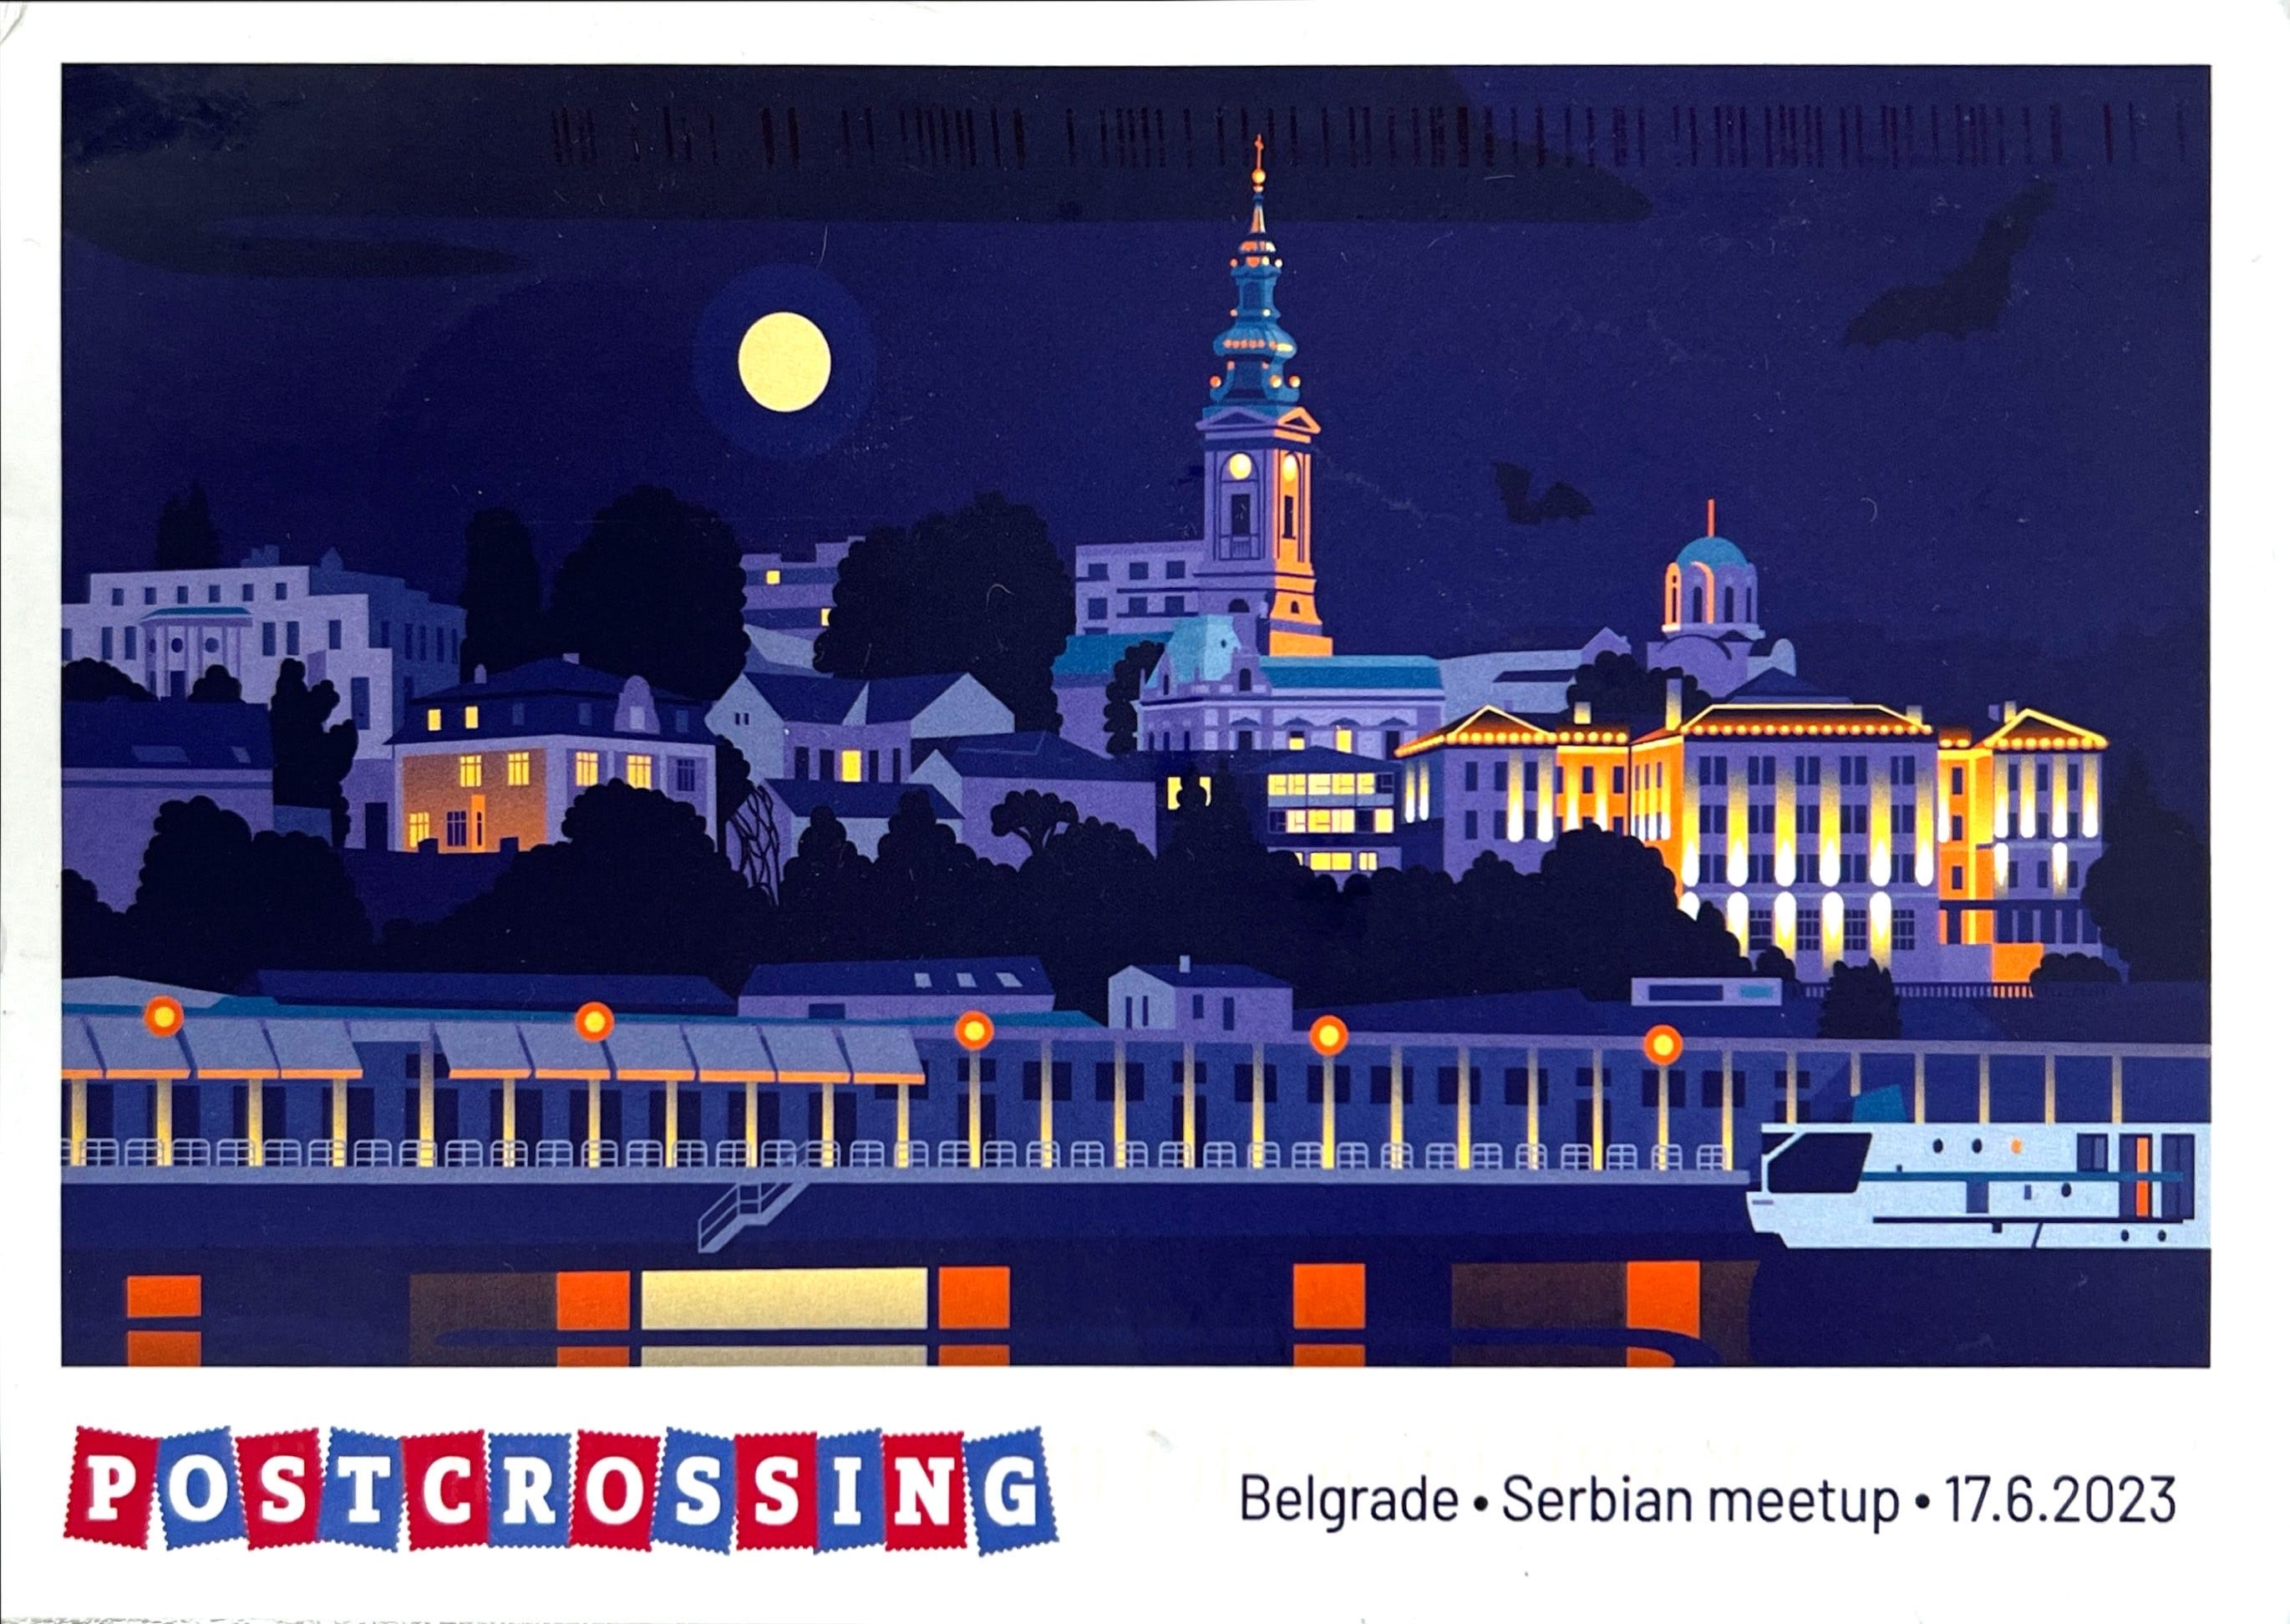 Illustration of city at night, with train in foreground. Postcrossing logo and caption "Belgrade, Serbian meetup, 17.6.2023"